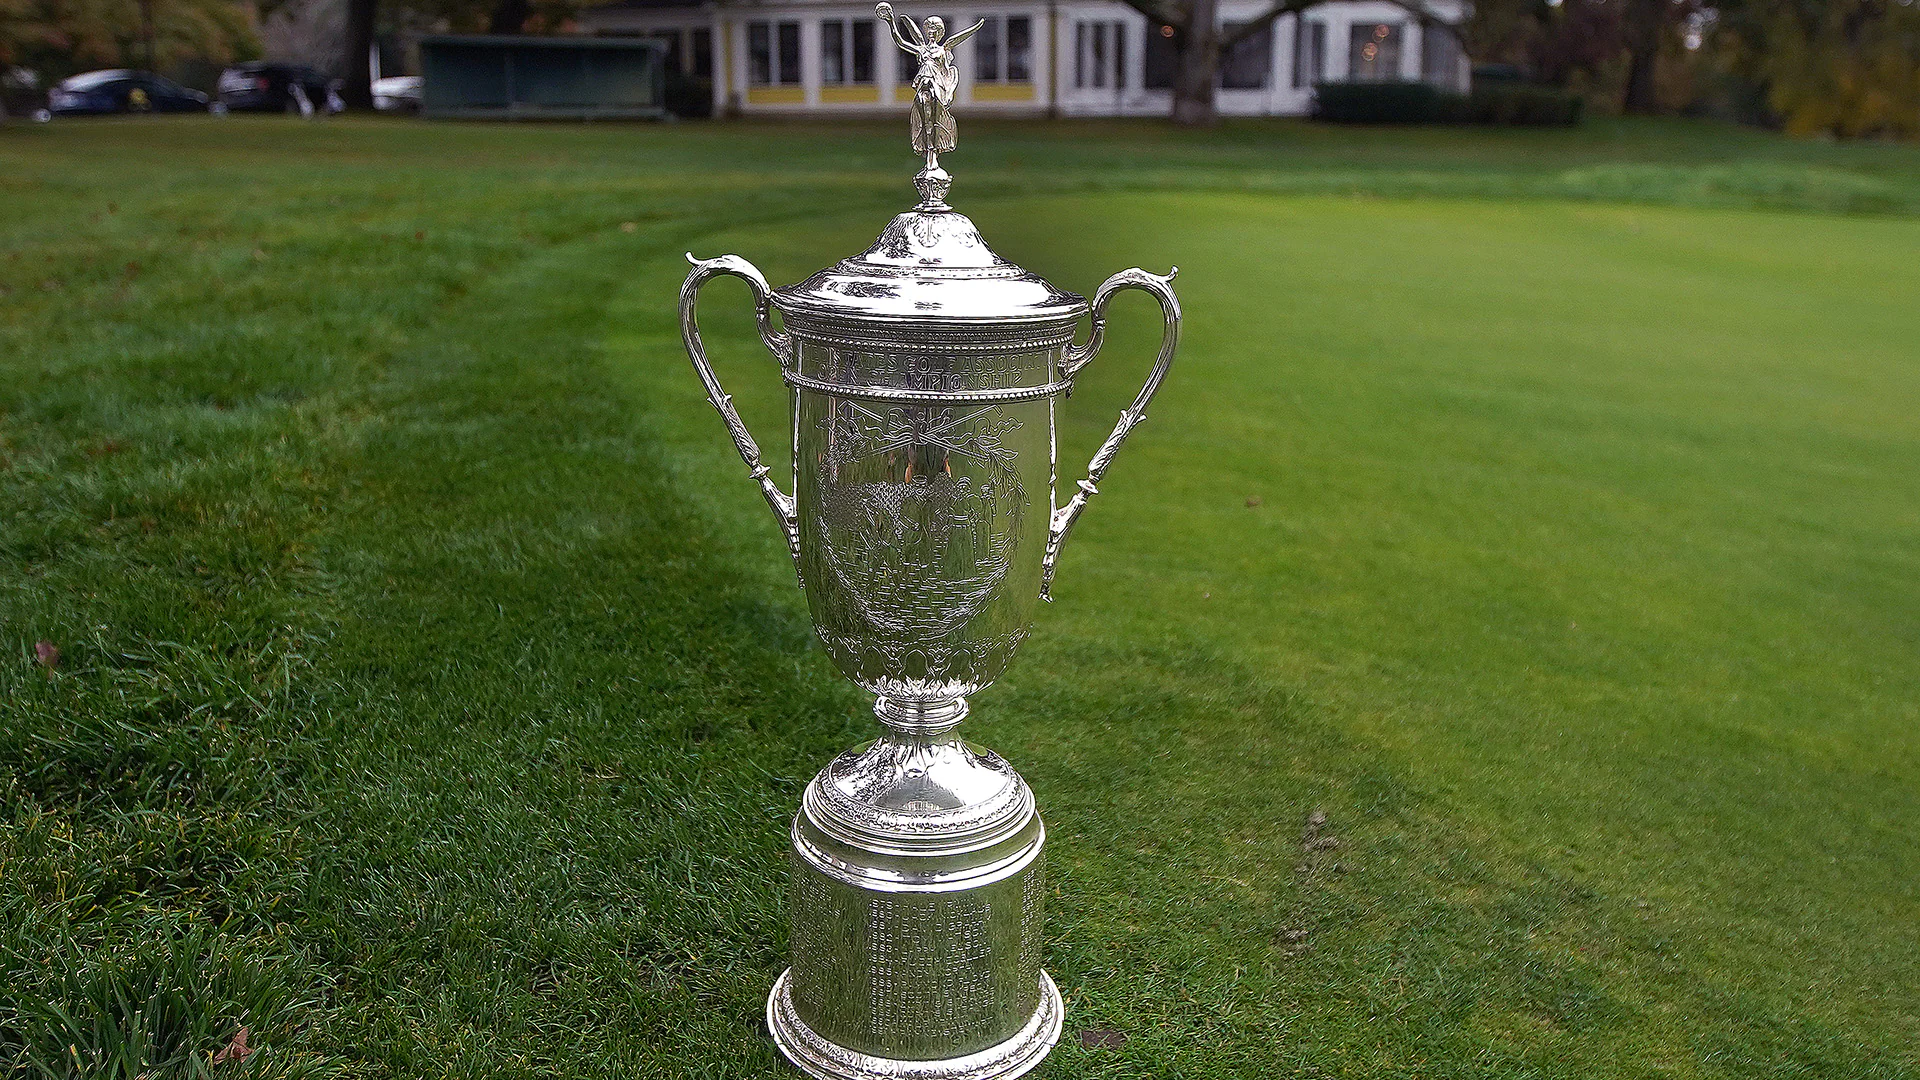 Brookline will look a little different when The Country Club hosts this year’s U.S. Open